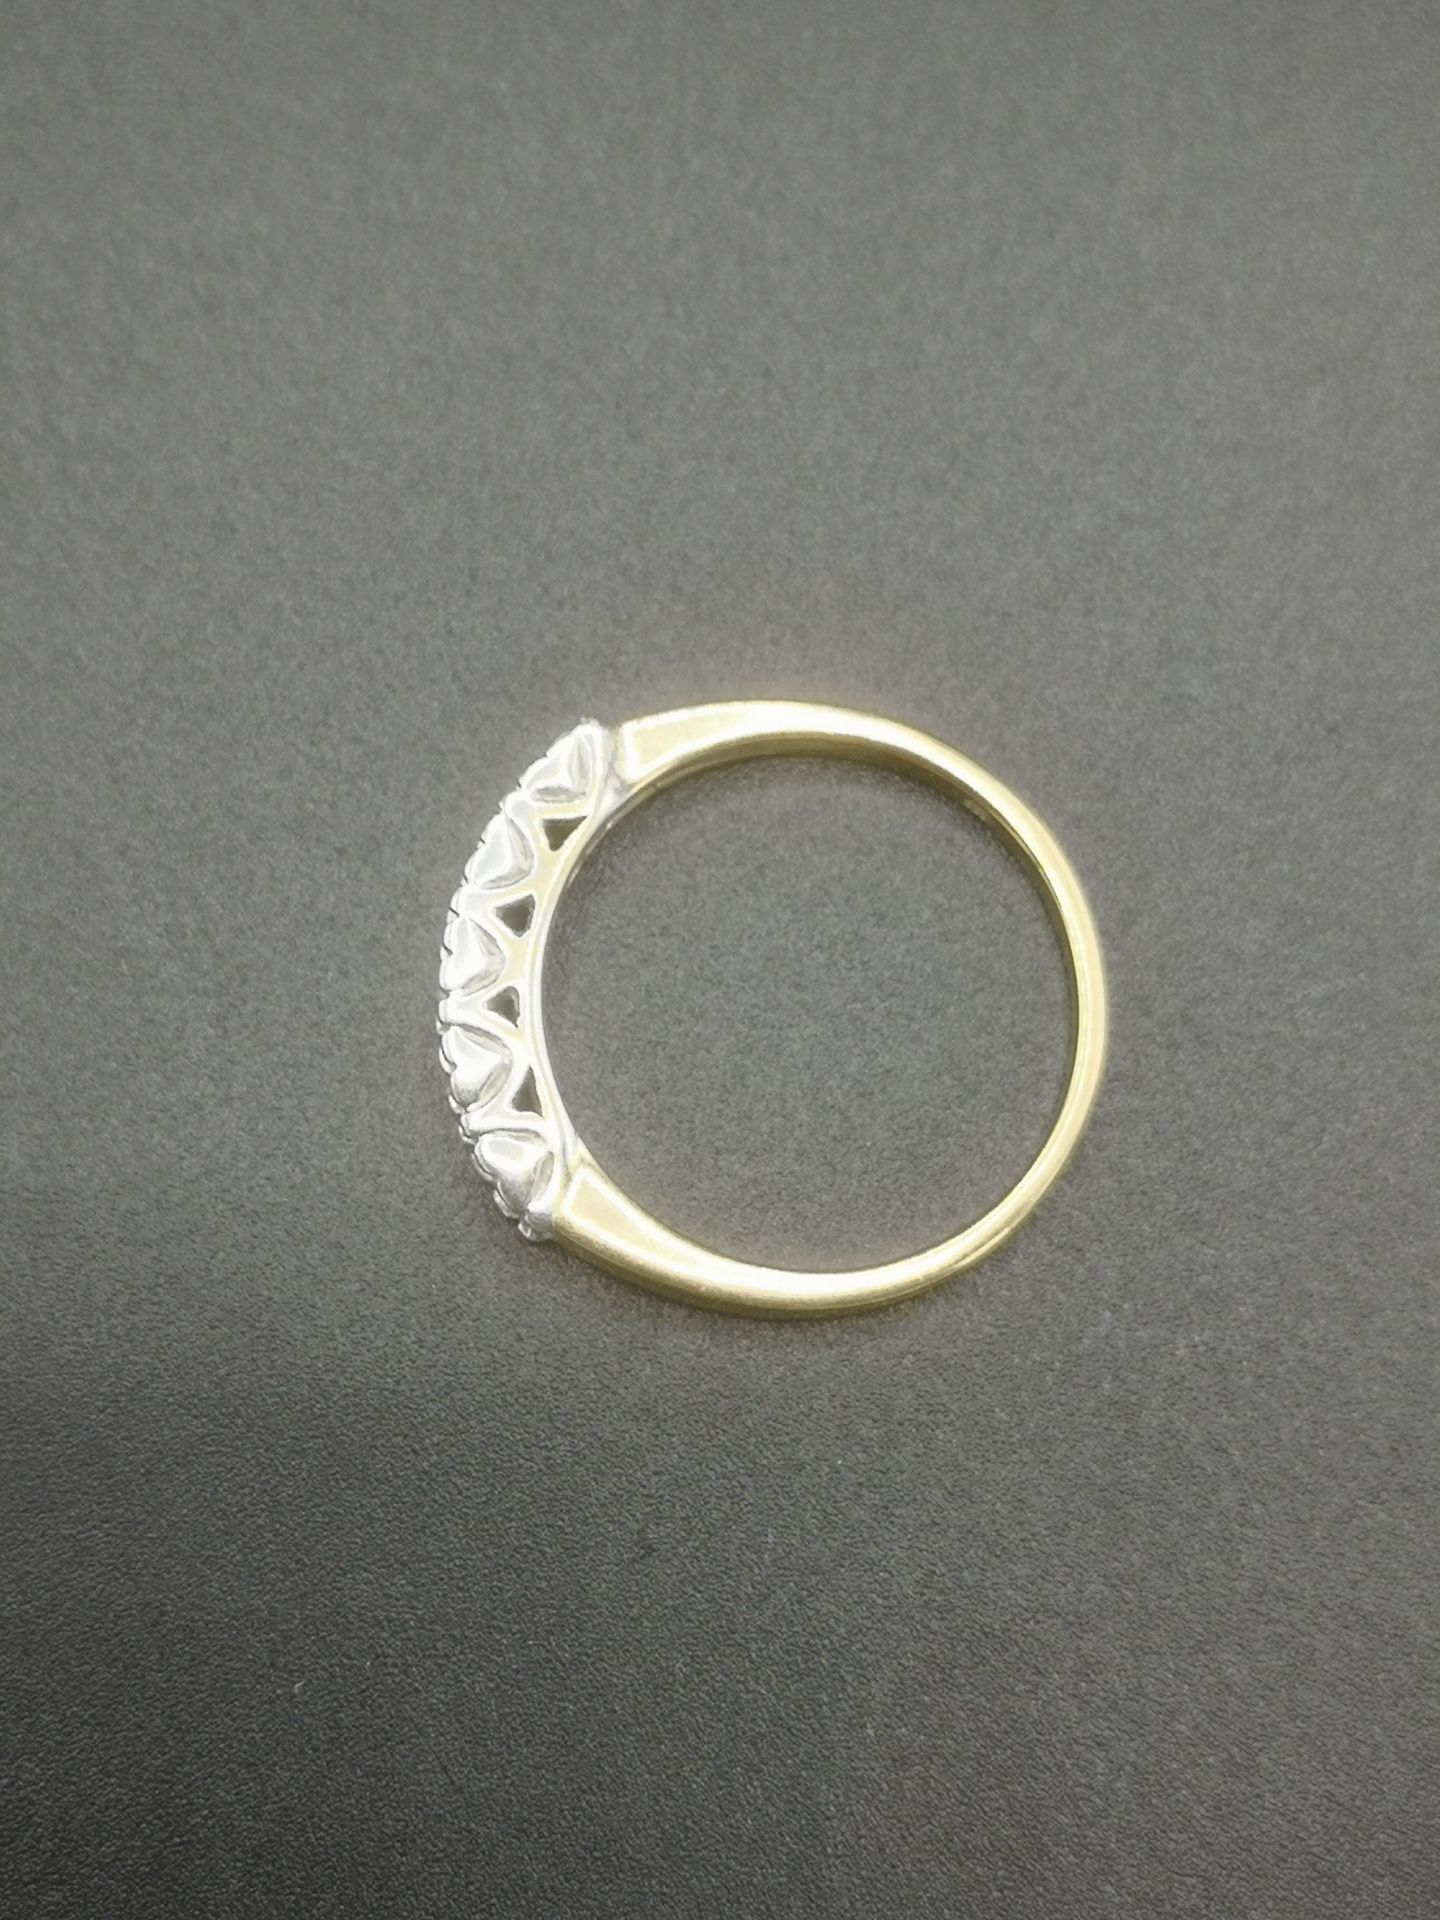 9ct gold ring with channel set diamonds - Image 3 of 5